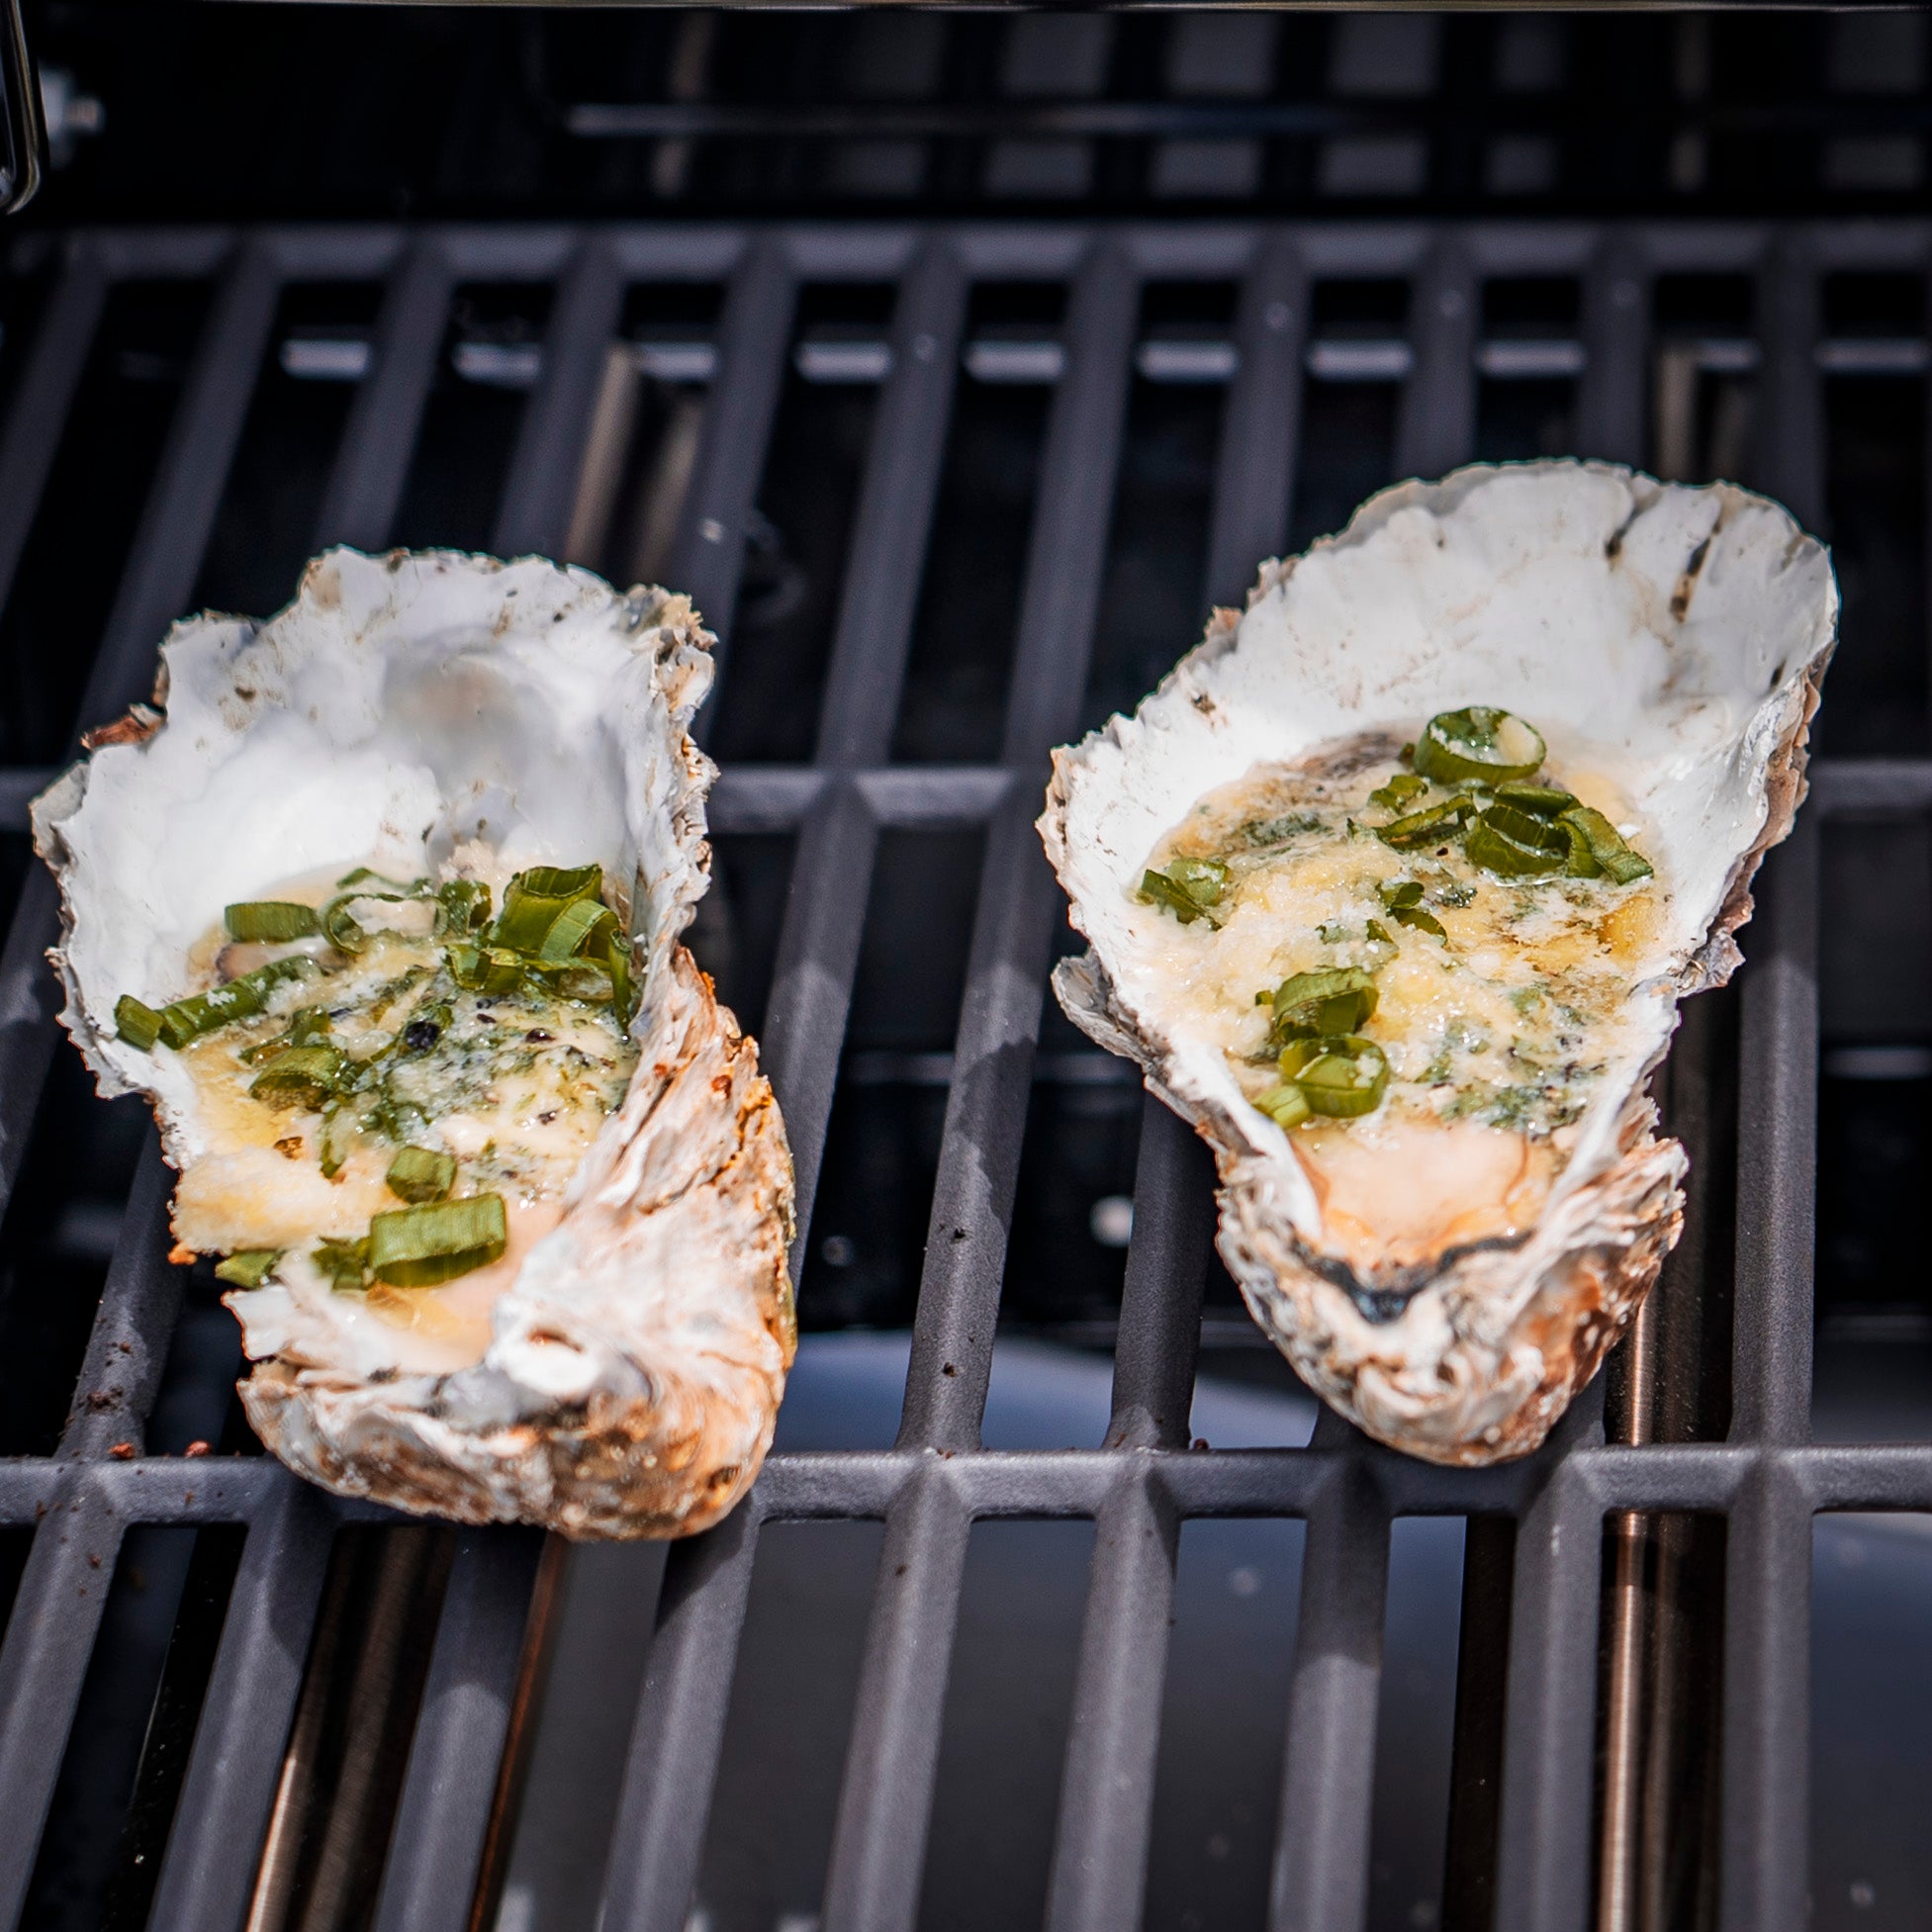 Large Carlsbad Oysters on the barbeque 